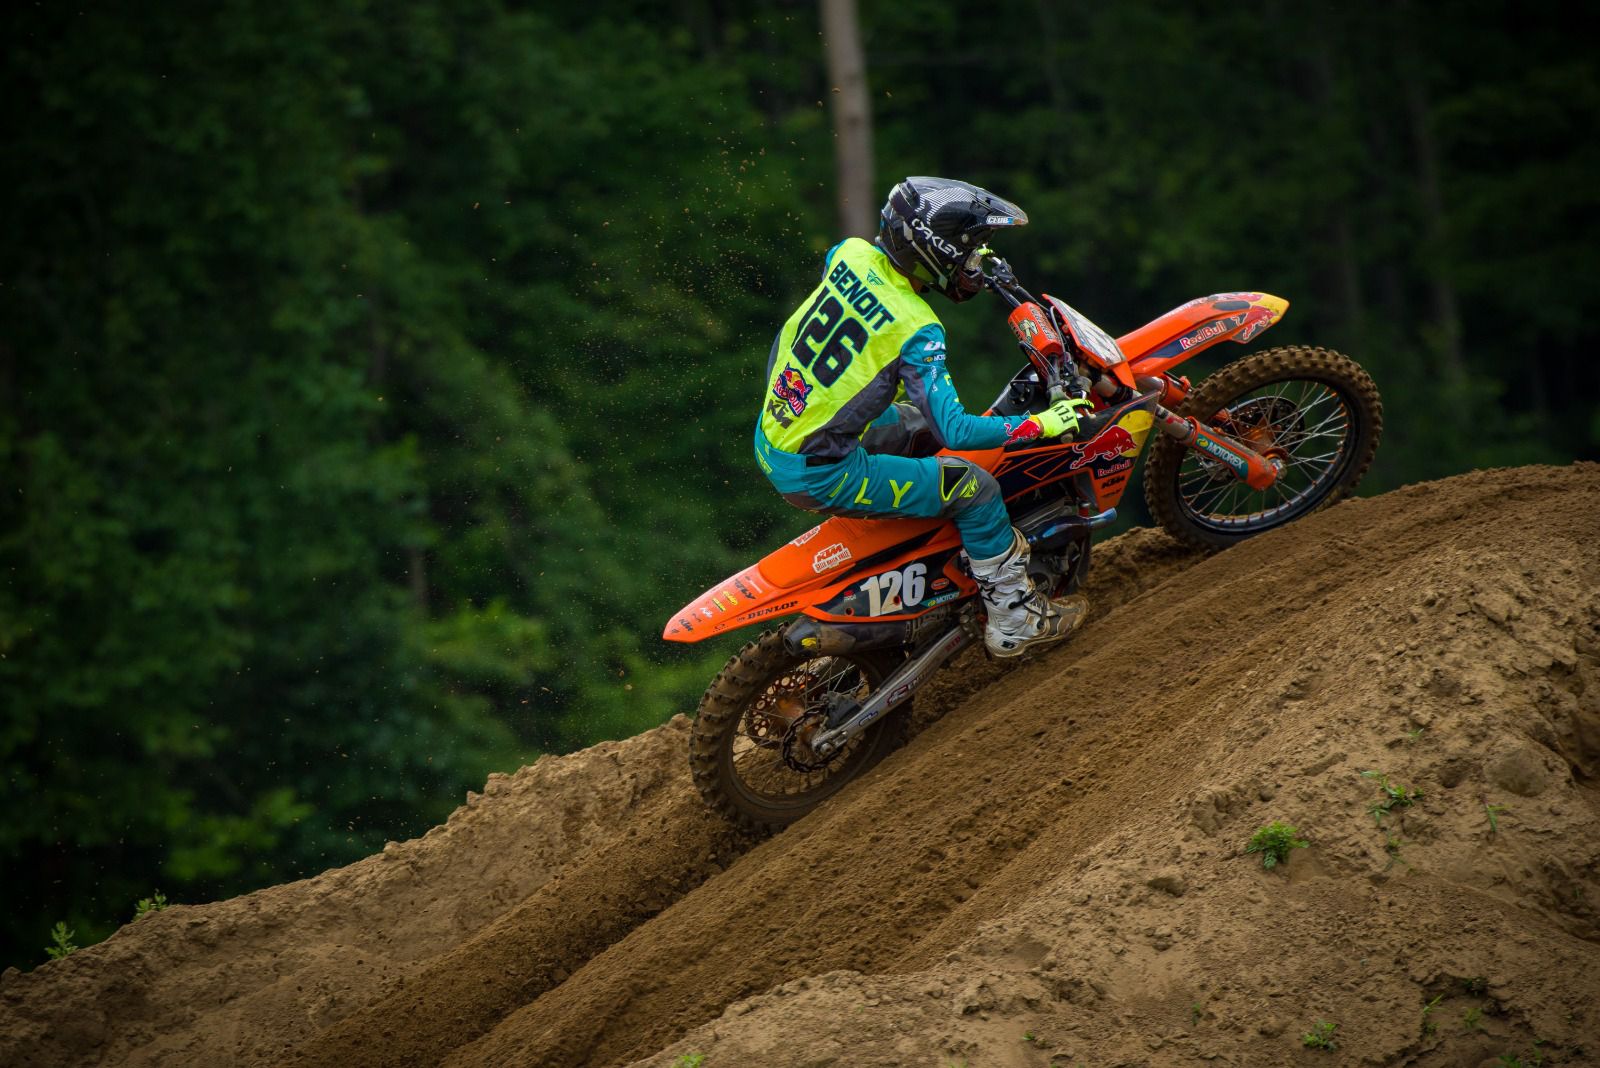 Kaven Benoit was second on the day behind McNabb. James Lissimore/KTM